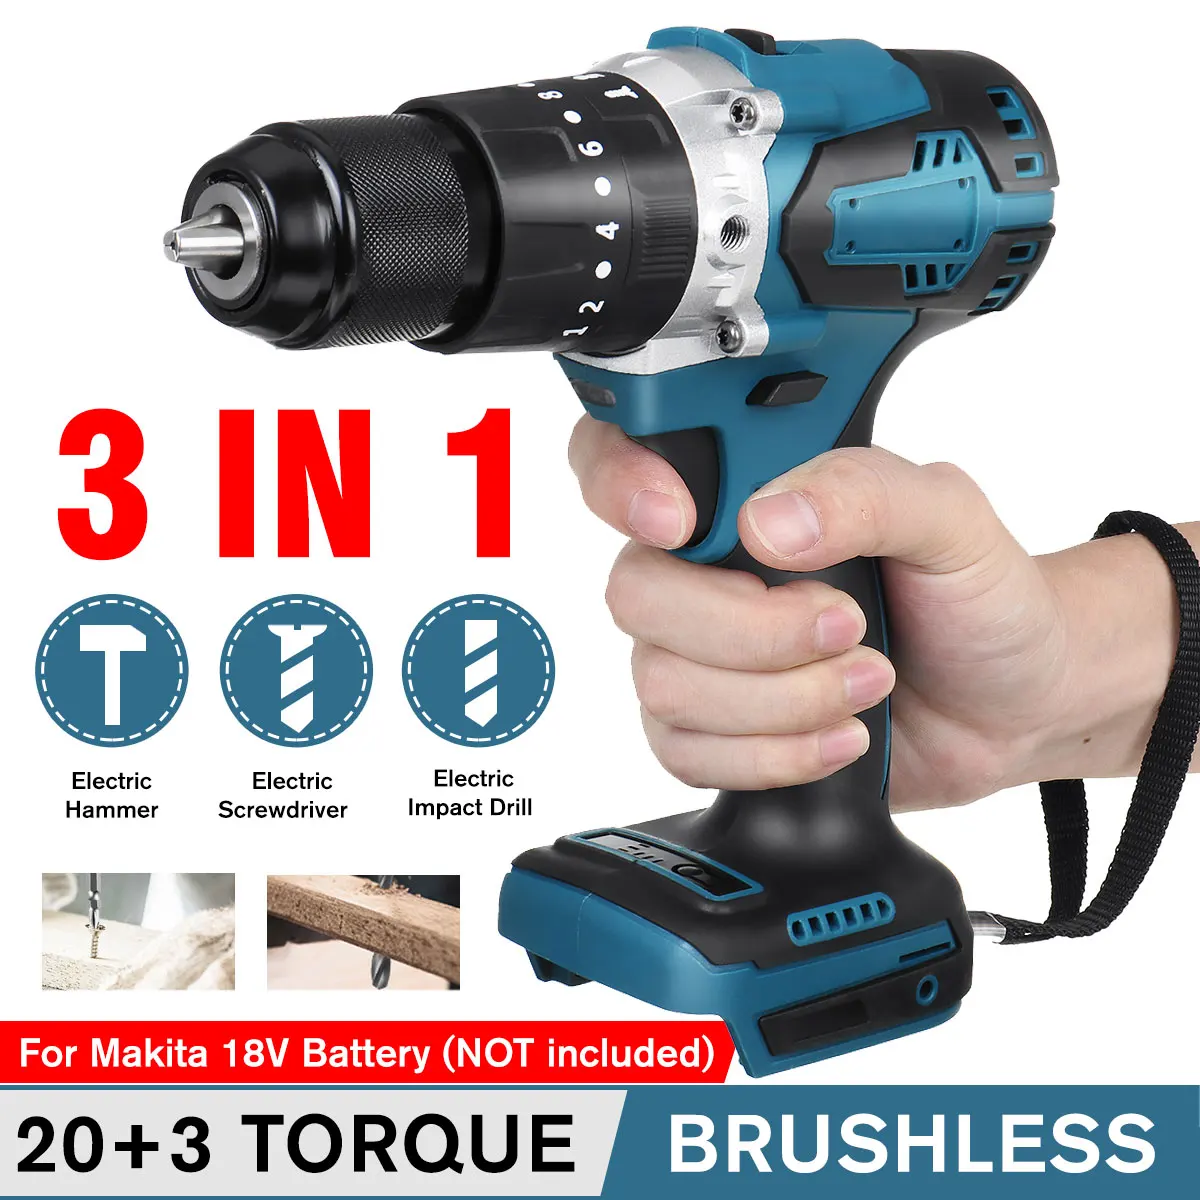 

Drillpro 3 in 1 13mm Brushless Electric Impact Drill Hammer 20+3 Torque Rechargeable Electric Screwdriver for Makita 18V Battery